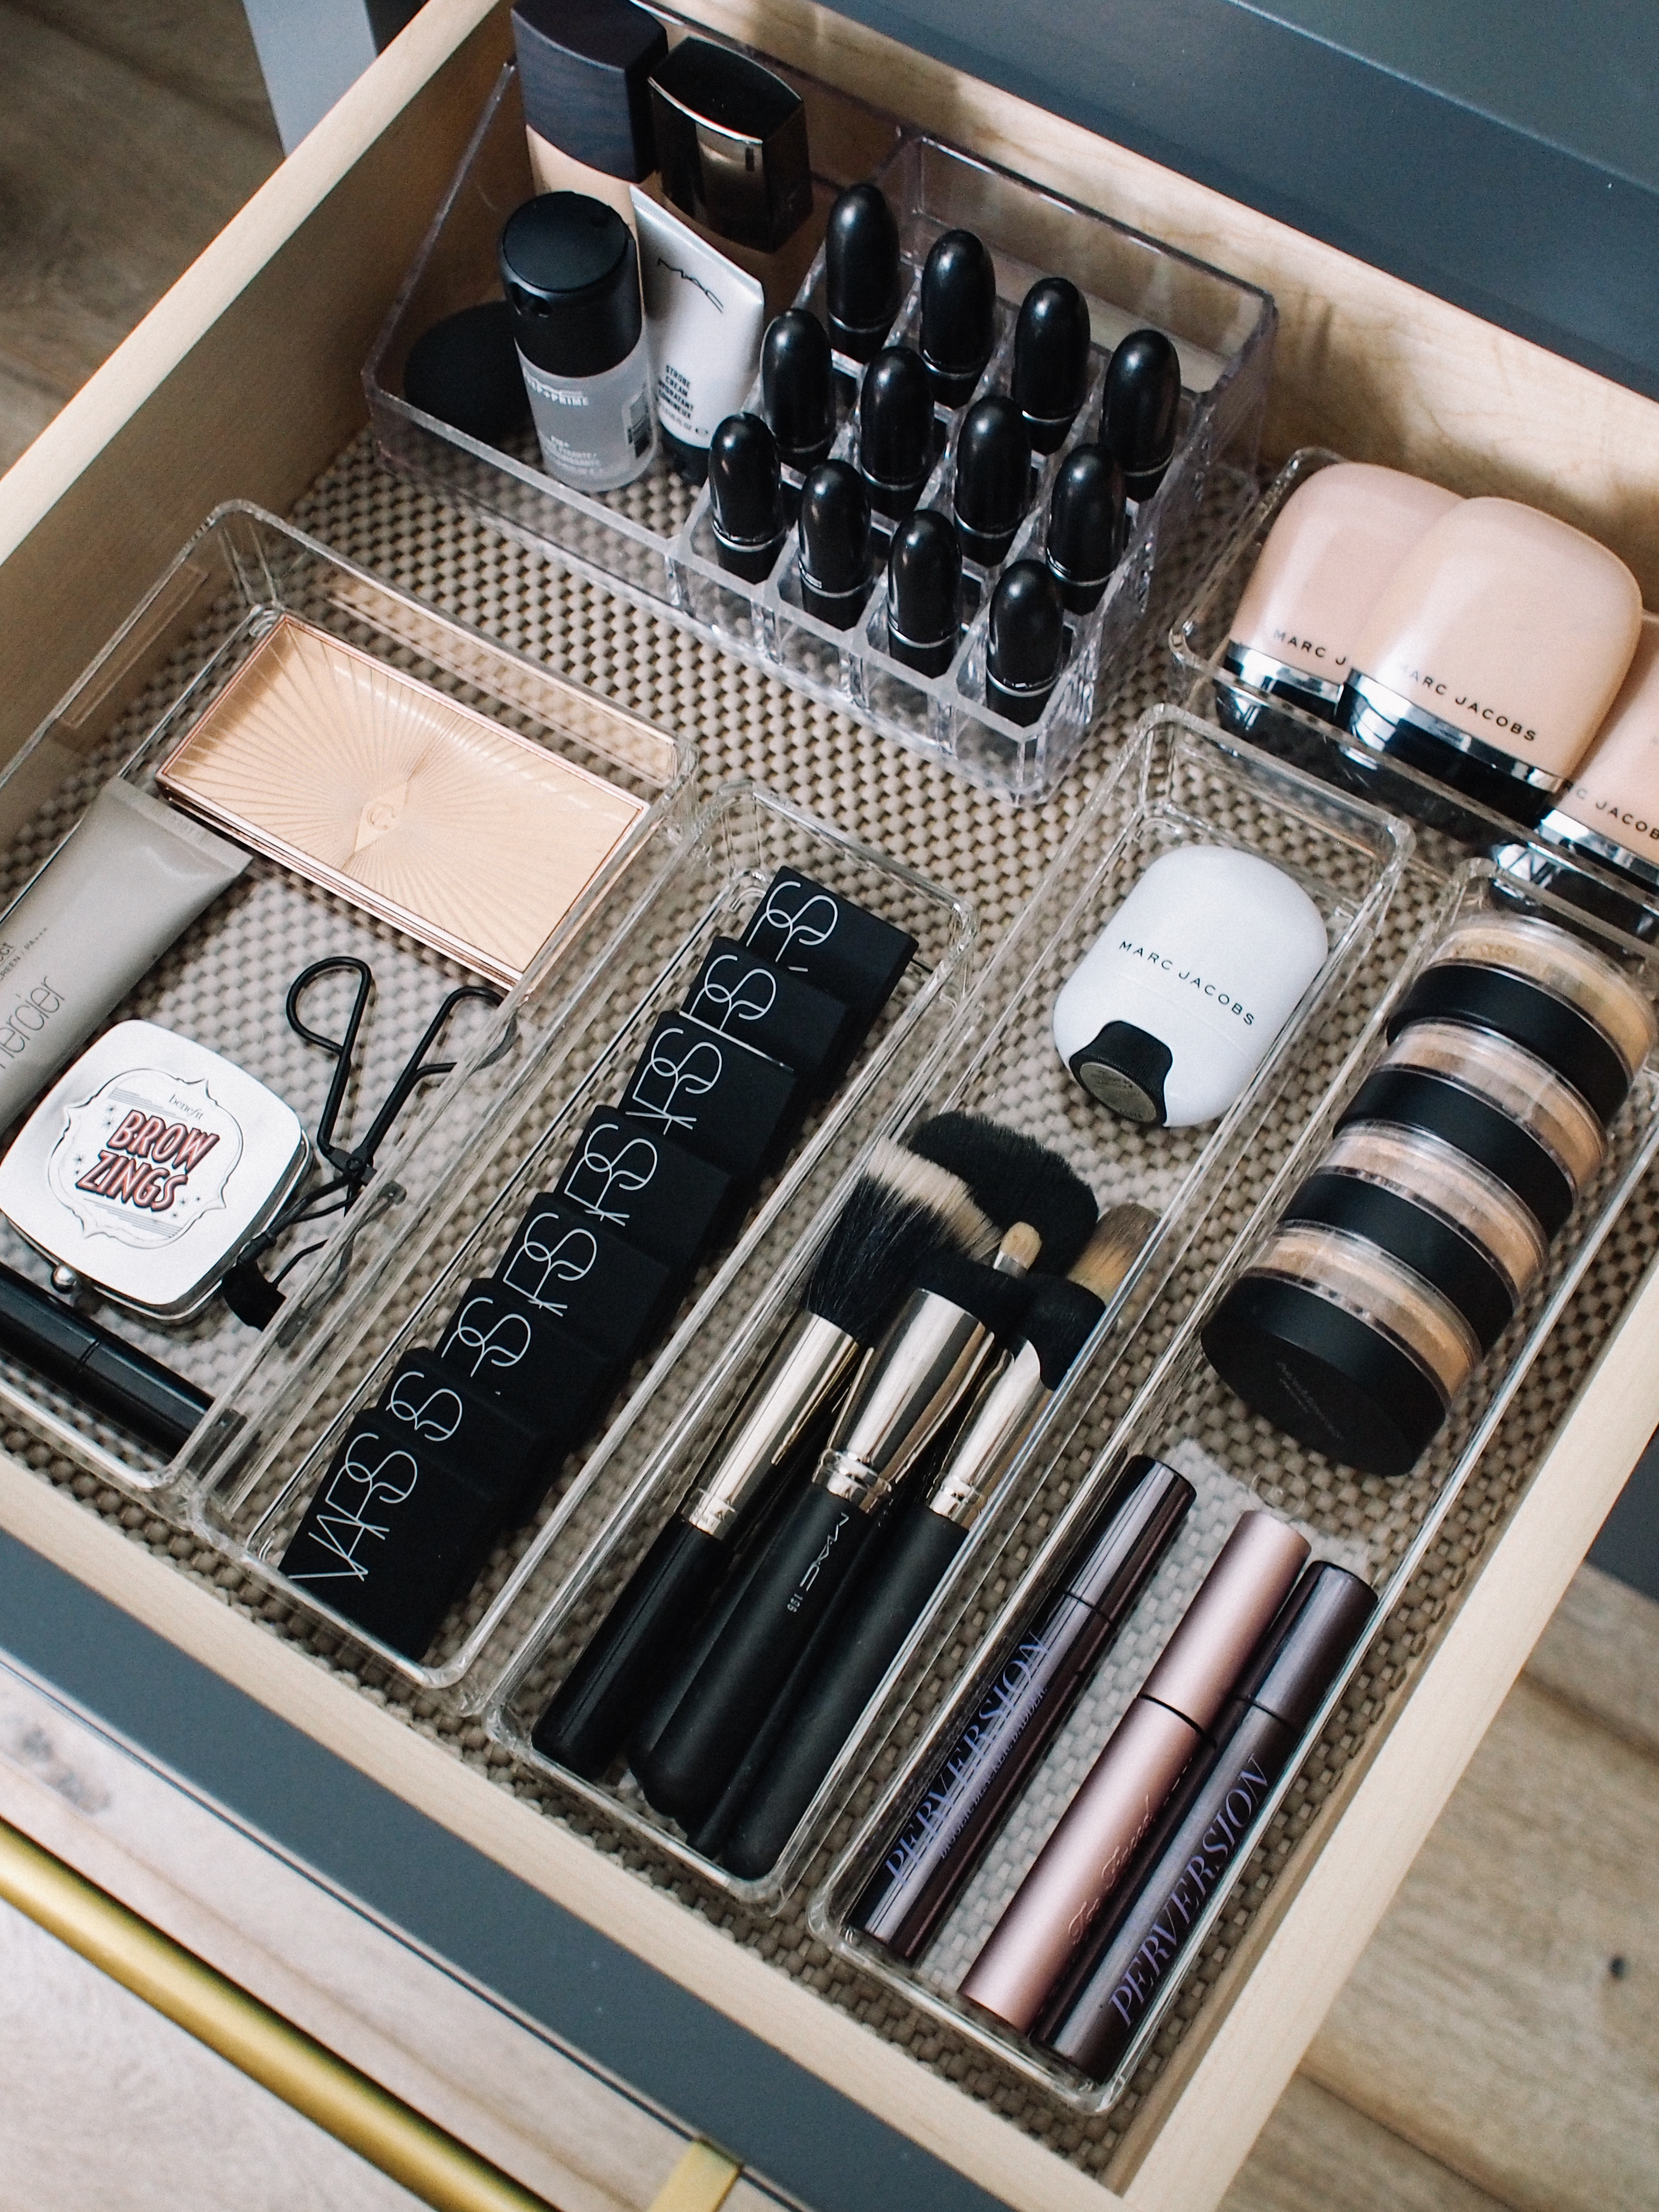 How I Organize My Makeup Drawers - Andee Layne